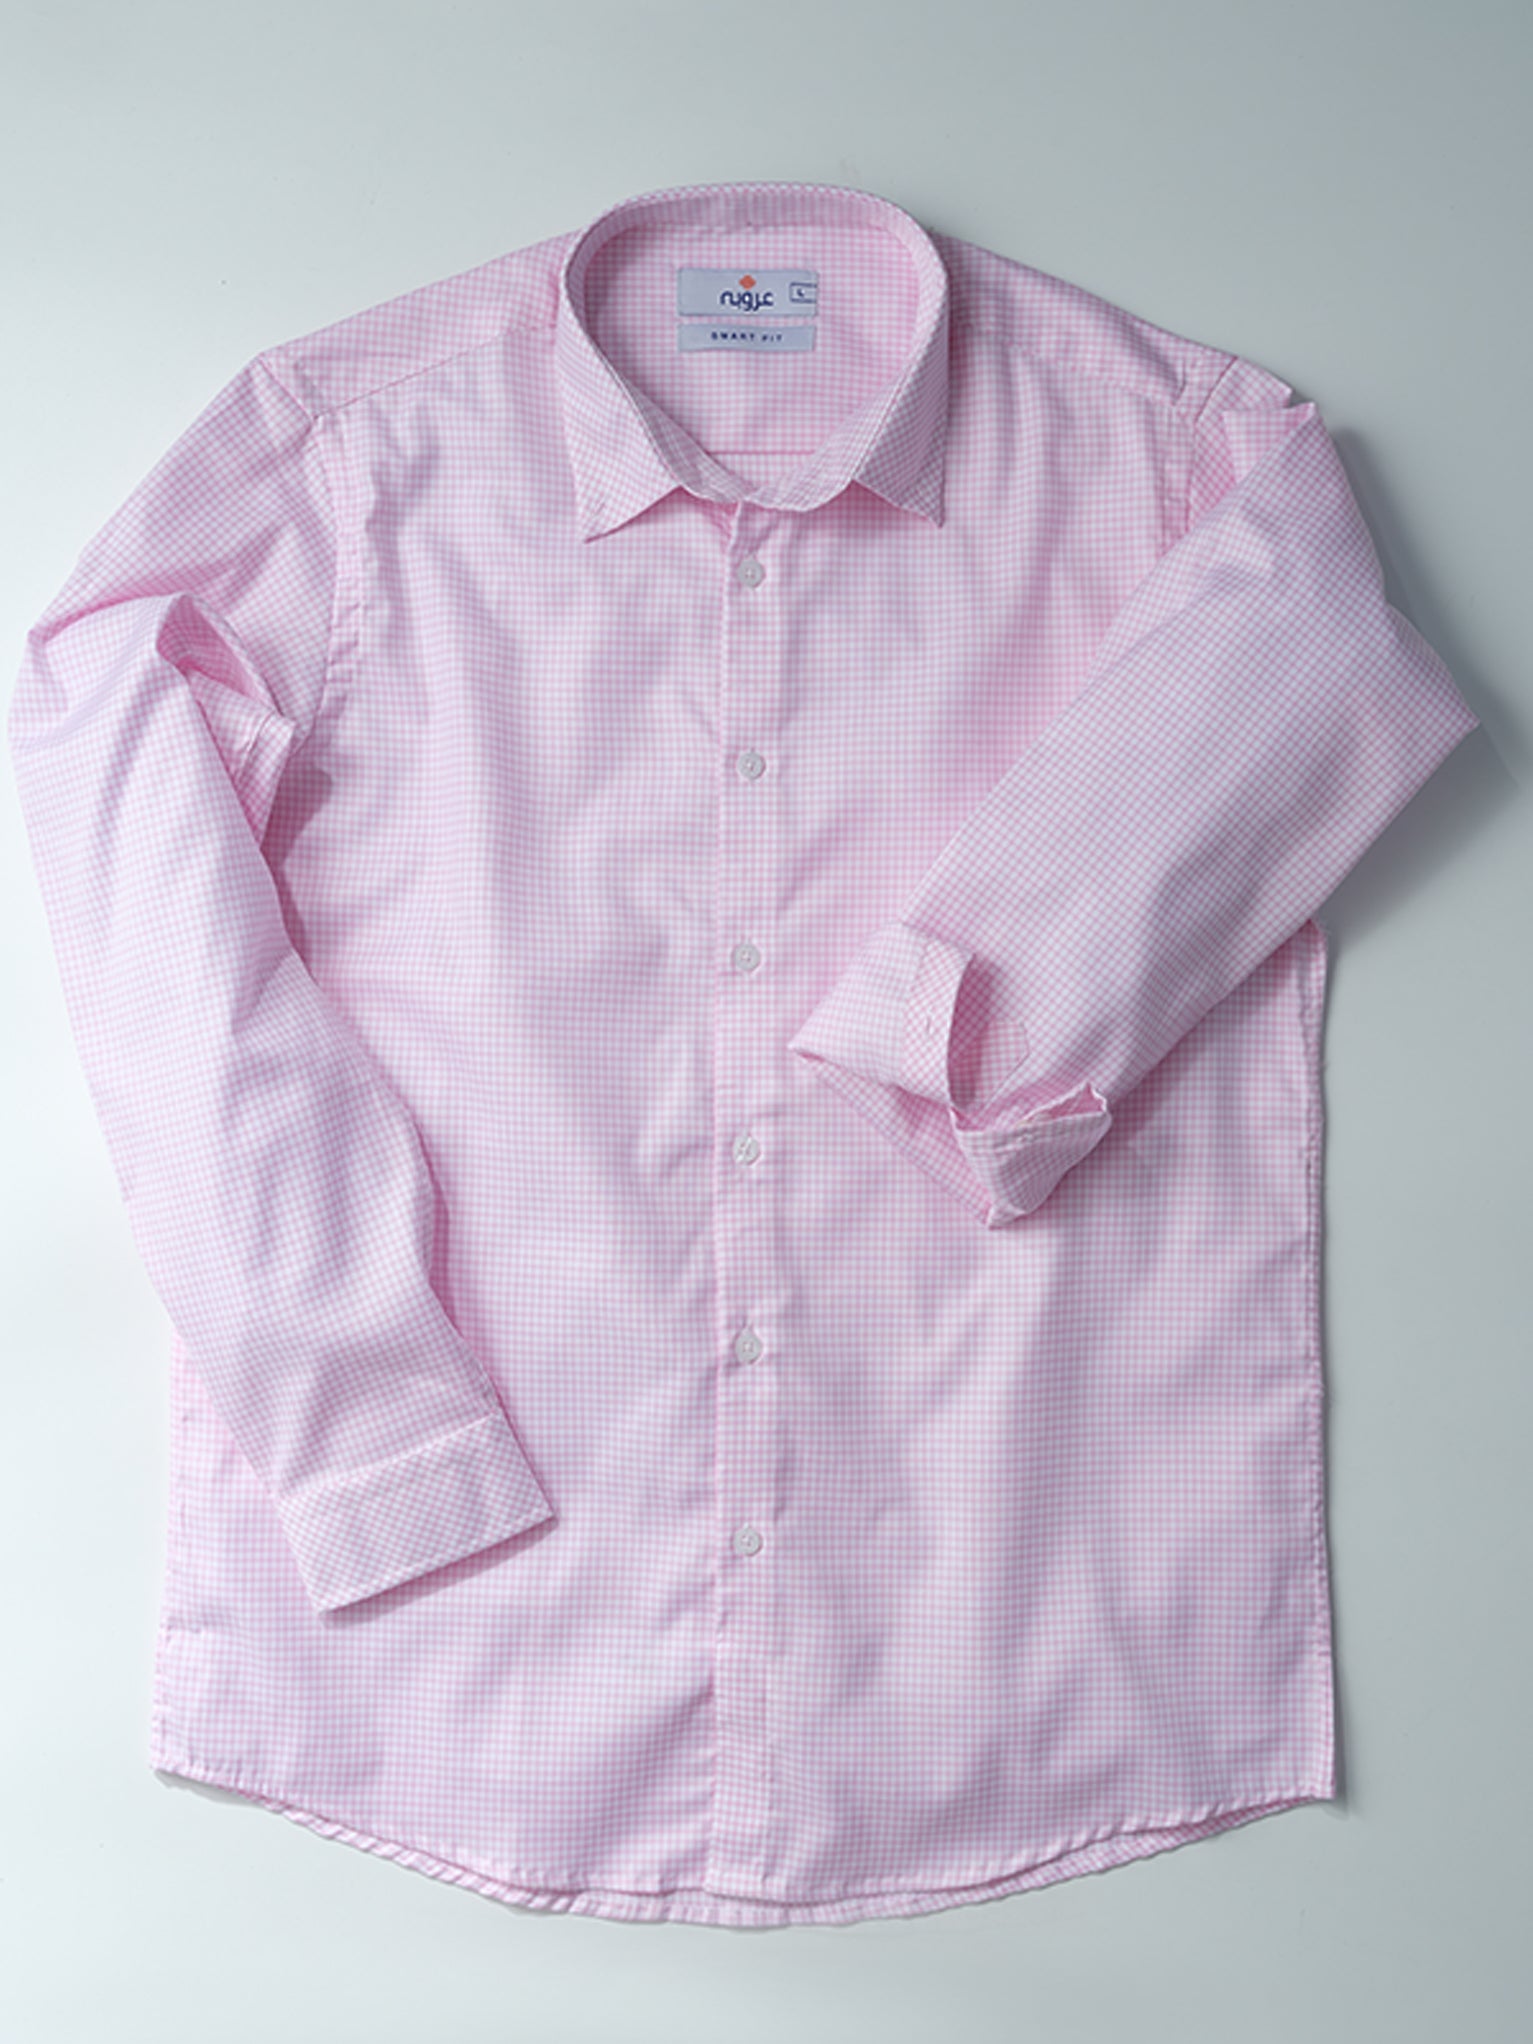 PINK-AND-WHITE-GINGHAM-SHIRT-FOR-MEN-2